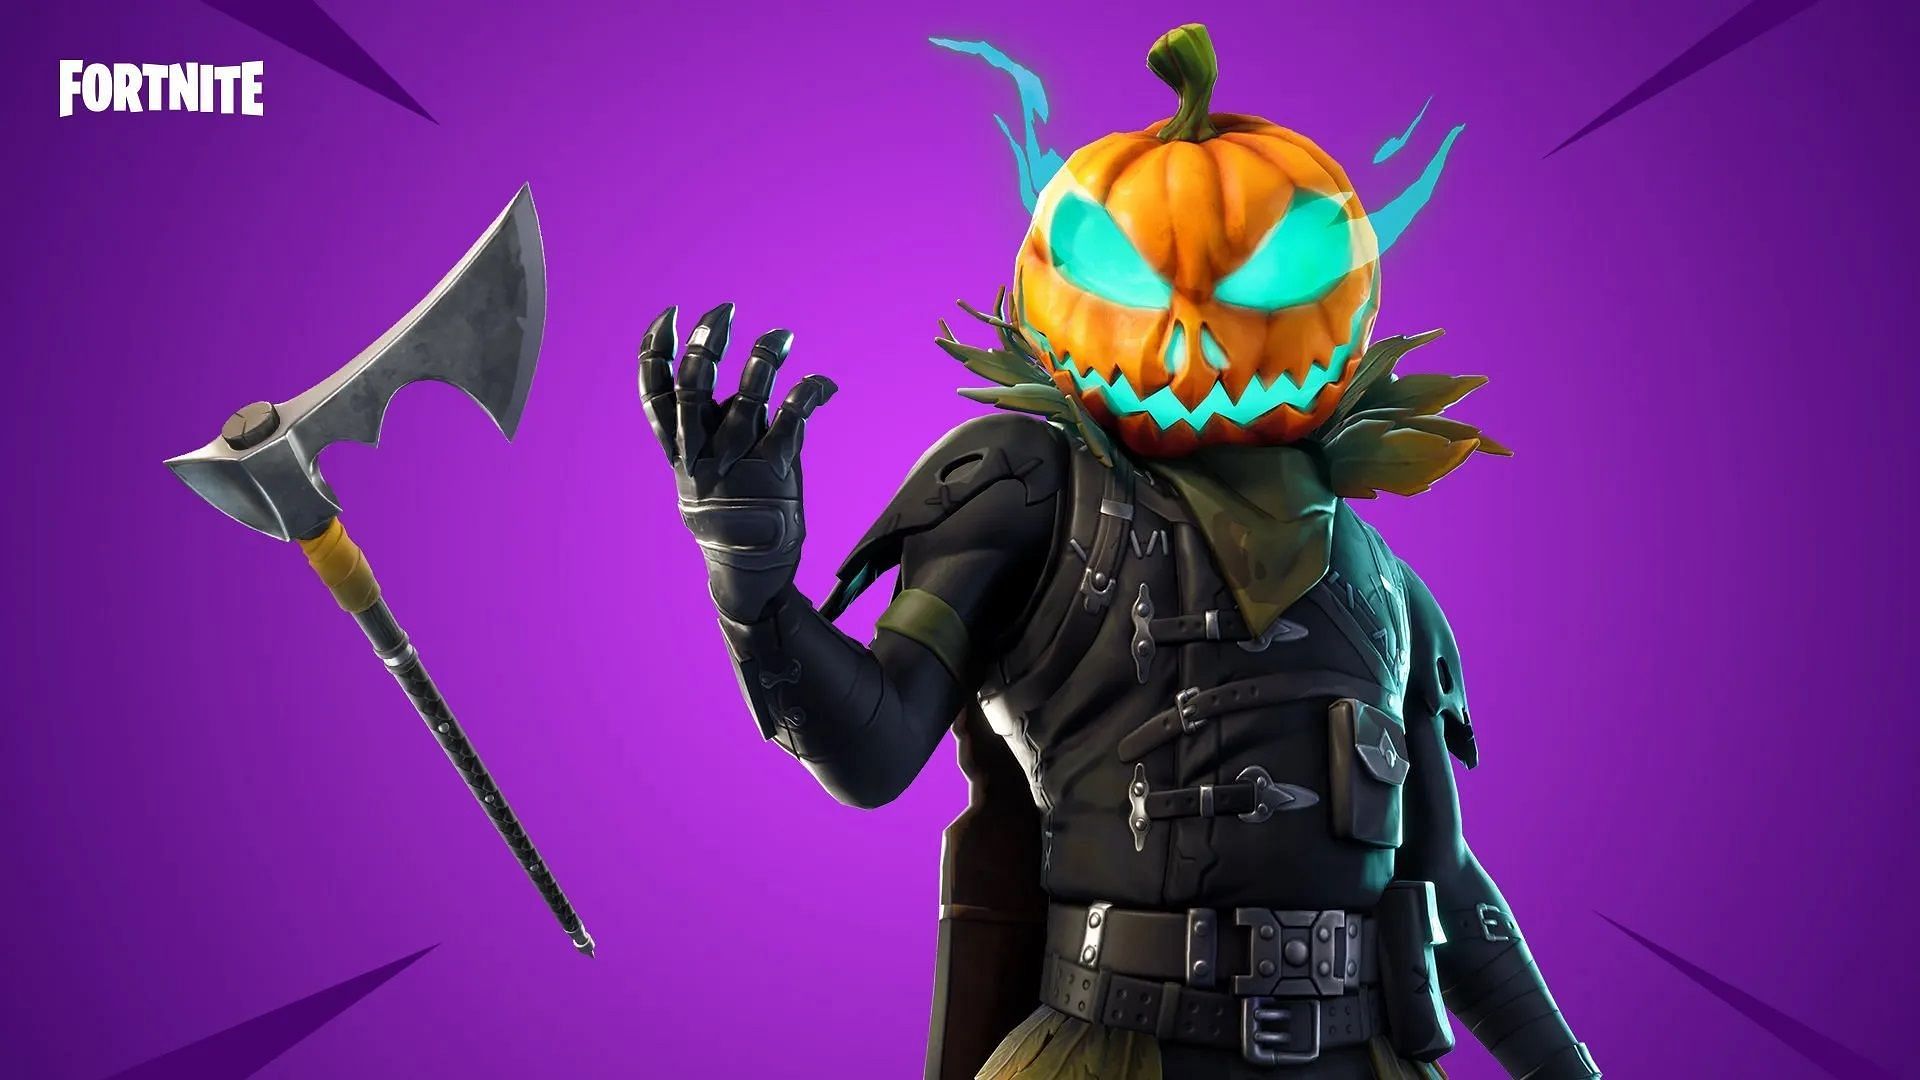 Hollowhead is one of many rare Fortnite skins that are exclusive to the Halloween event (Image via Epic Games)